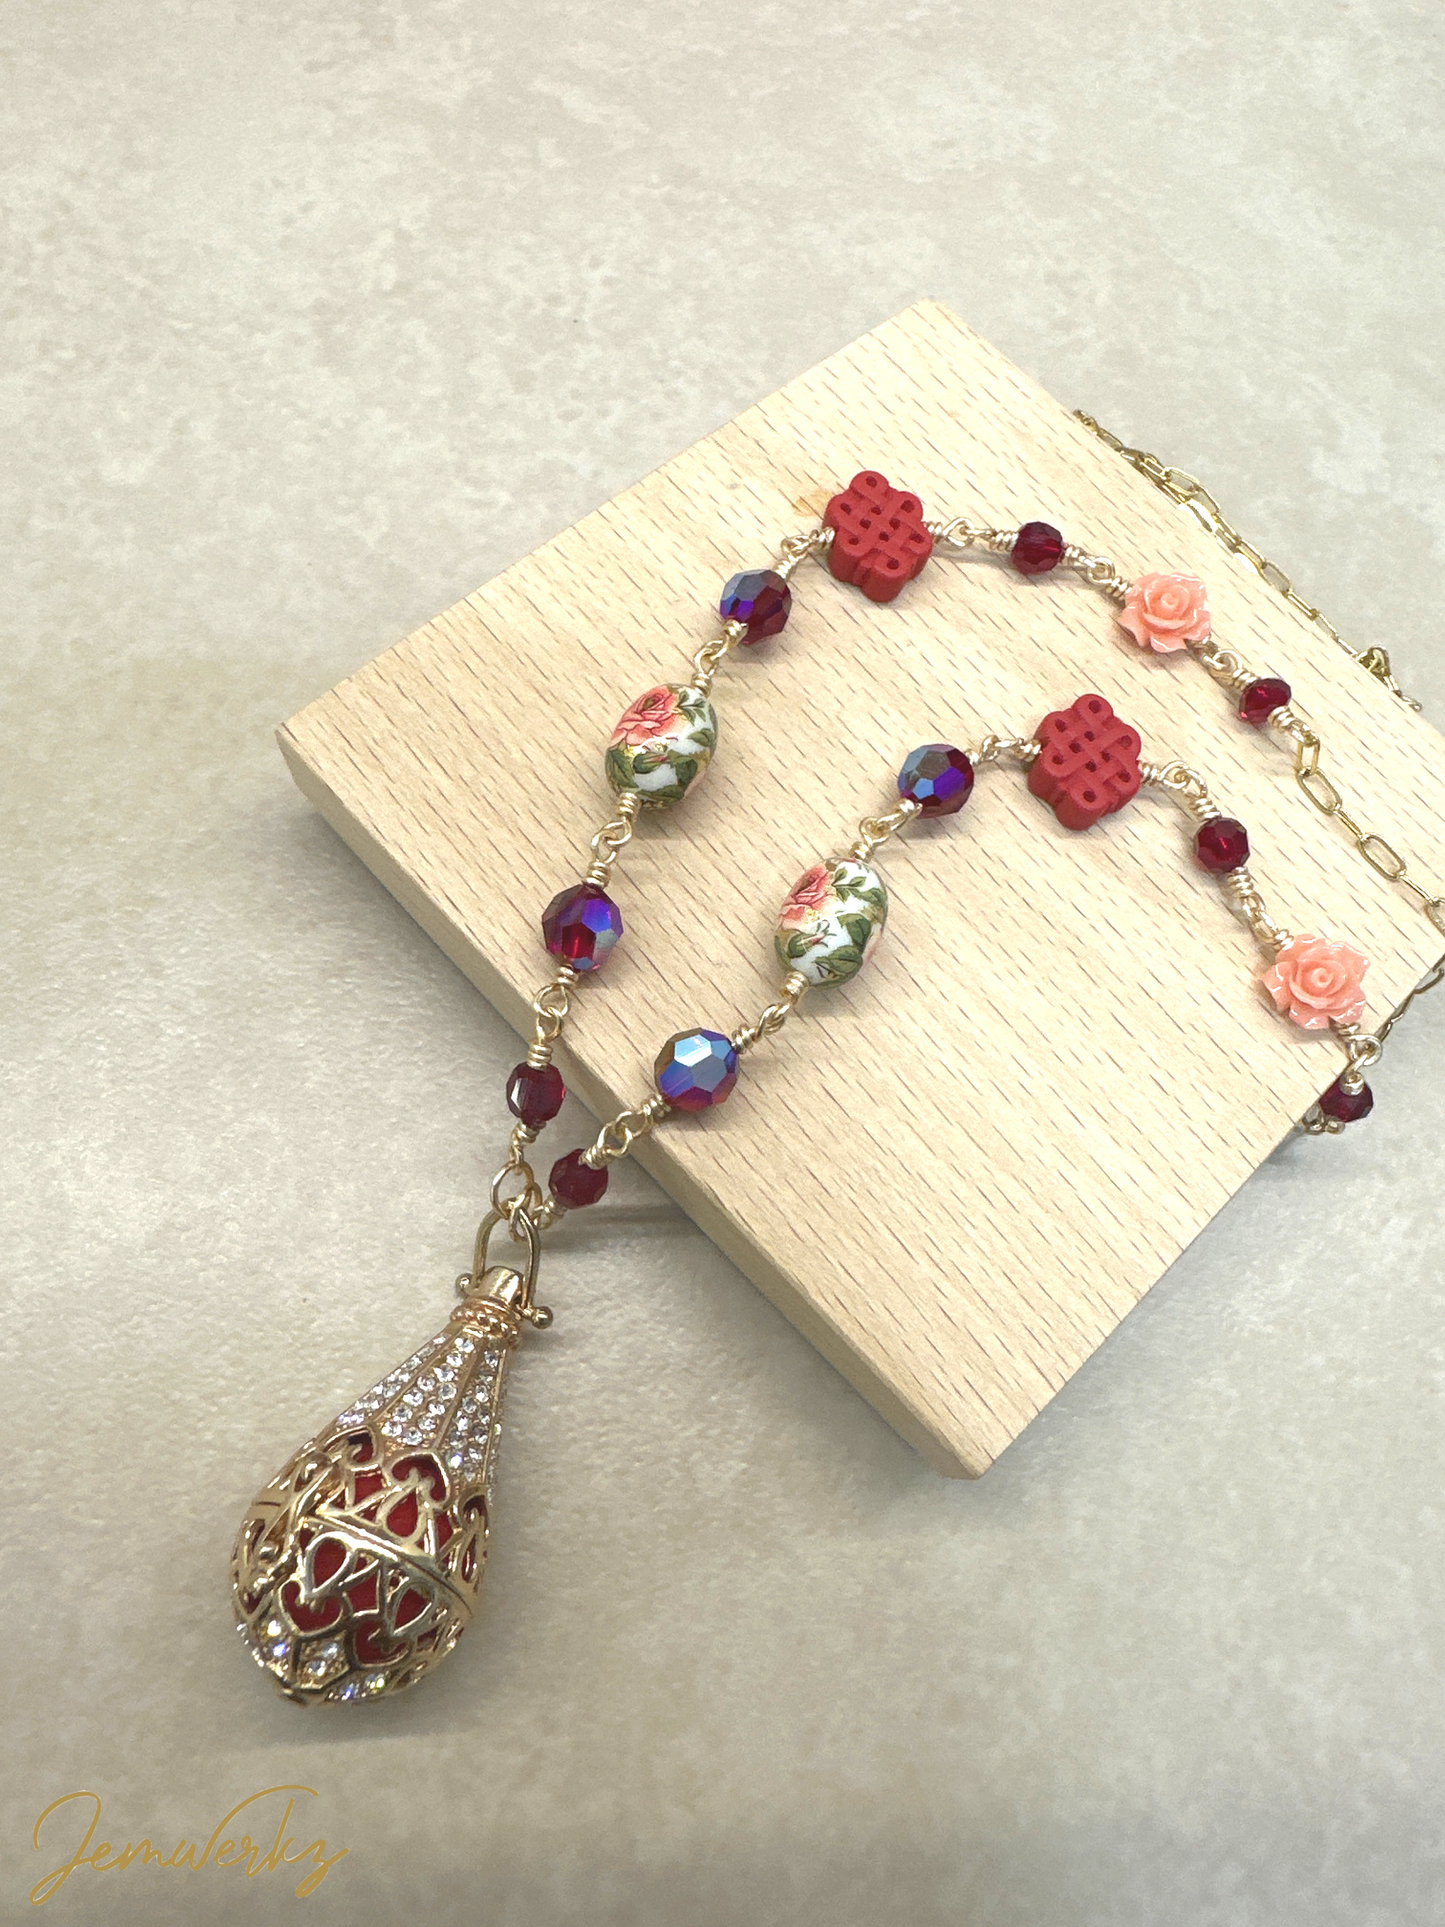 SAMIKO - Red Swarovski Crystal Necklace with Japan Floral Beads, Chinese Knot, Rose and Aroma Cage